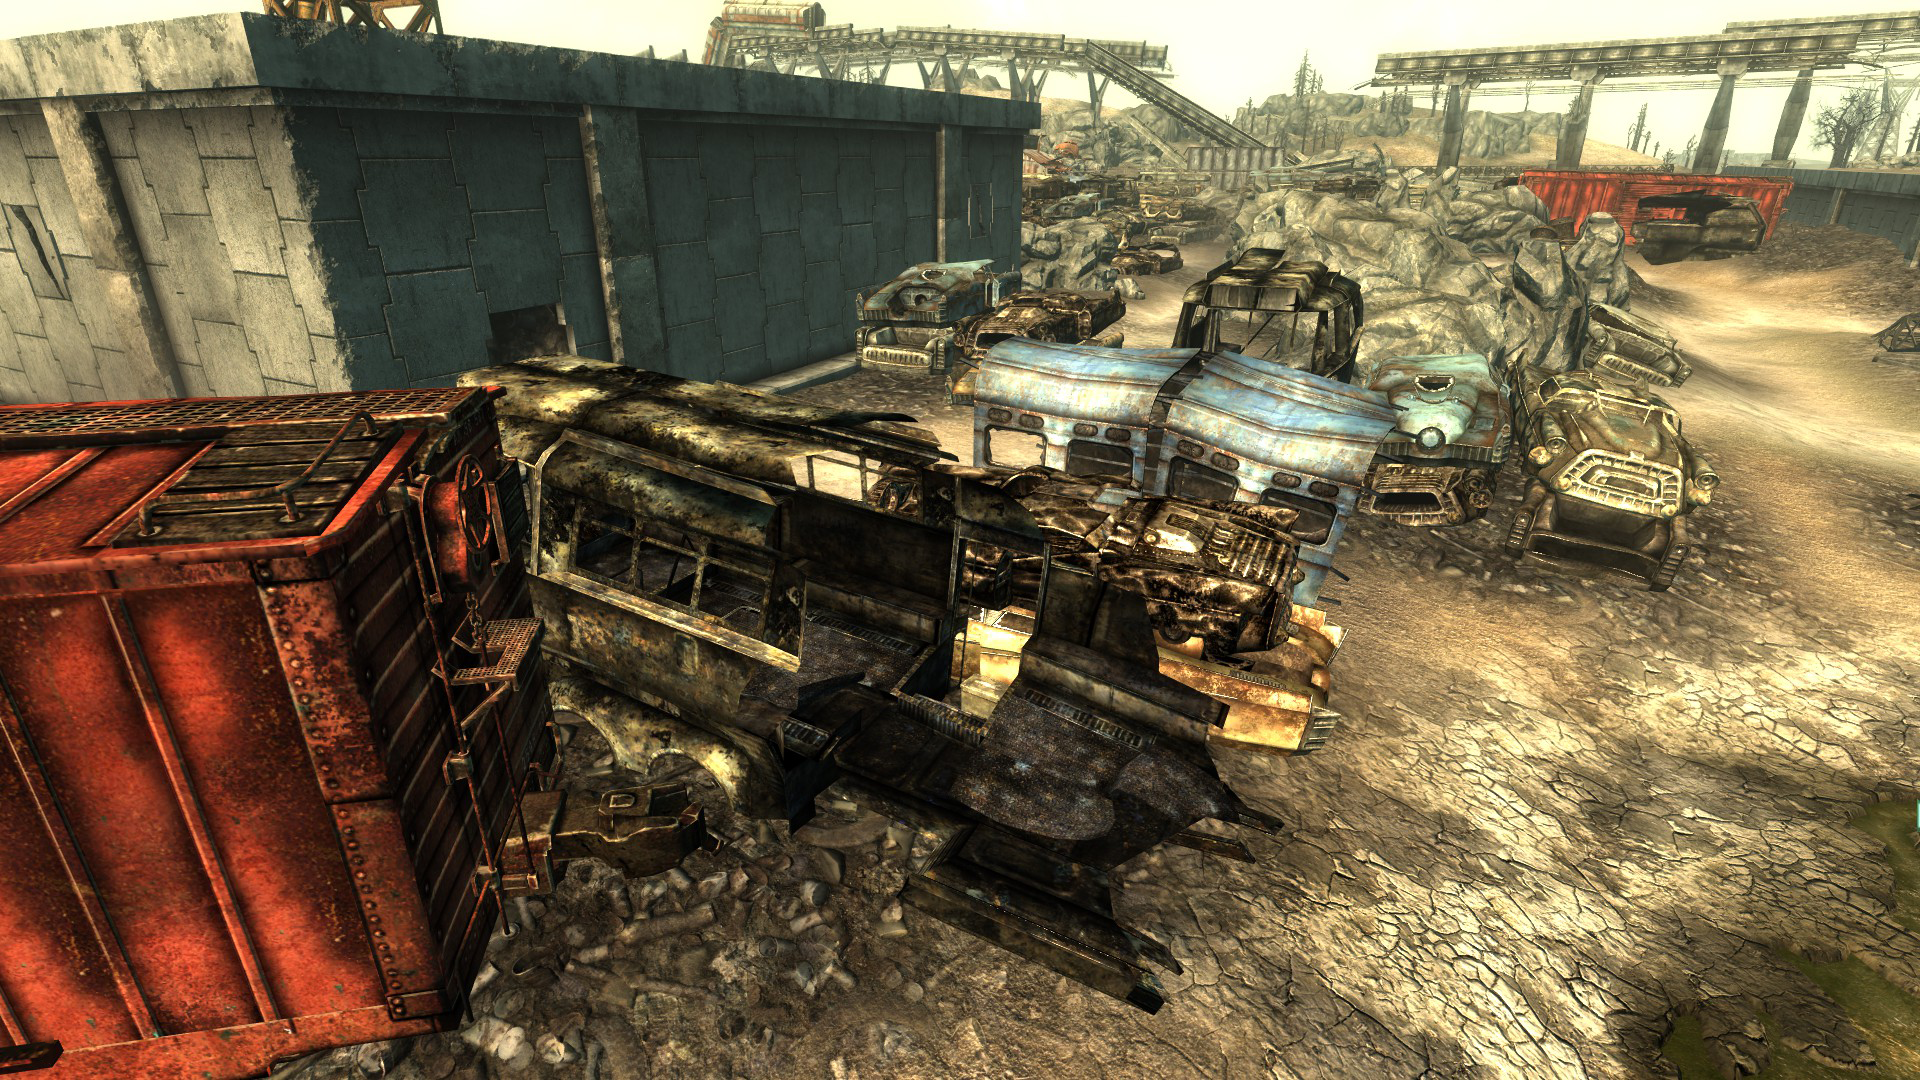 where is the scrapyard in fallout 3